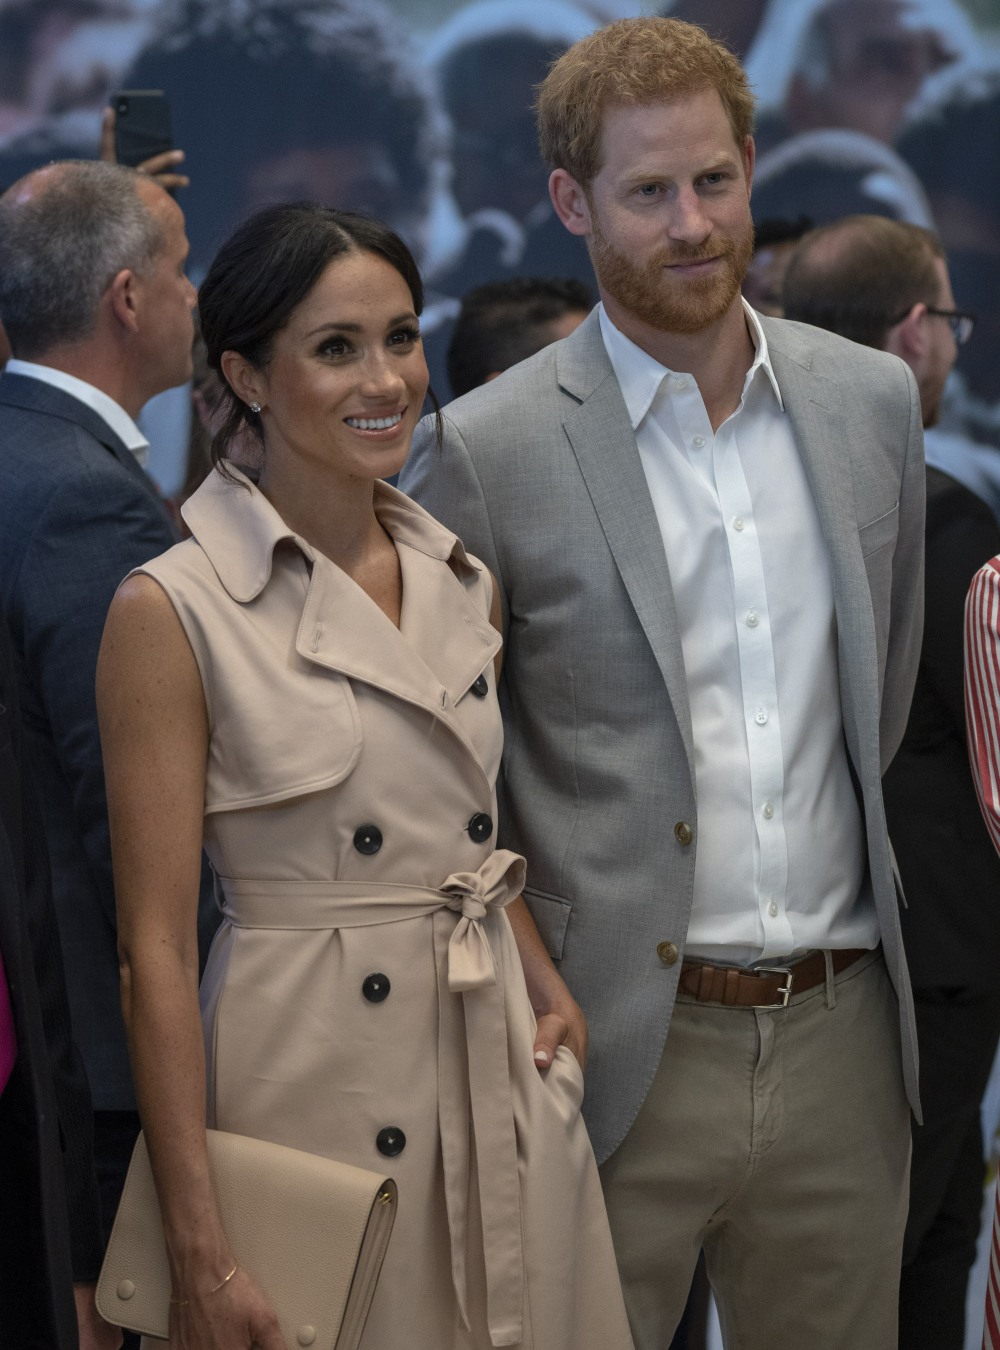 The Duke and Duchess of Sussex  visited the Nelson Mandela Centenary Exhibition at Southbank Centre's Queen Elizabeth Hall.